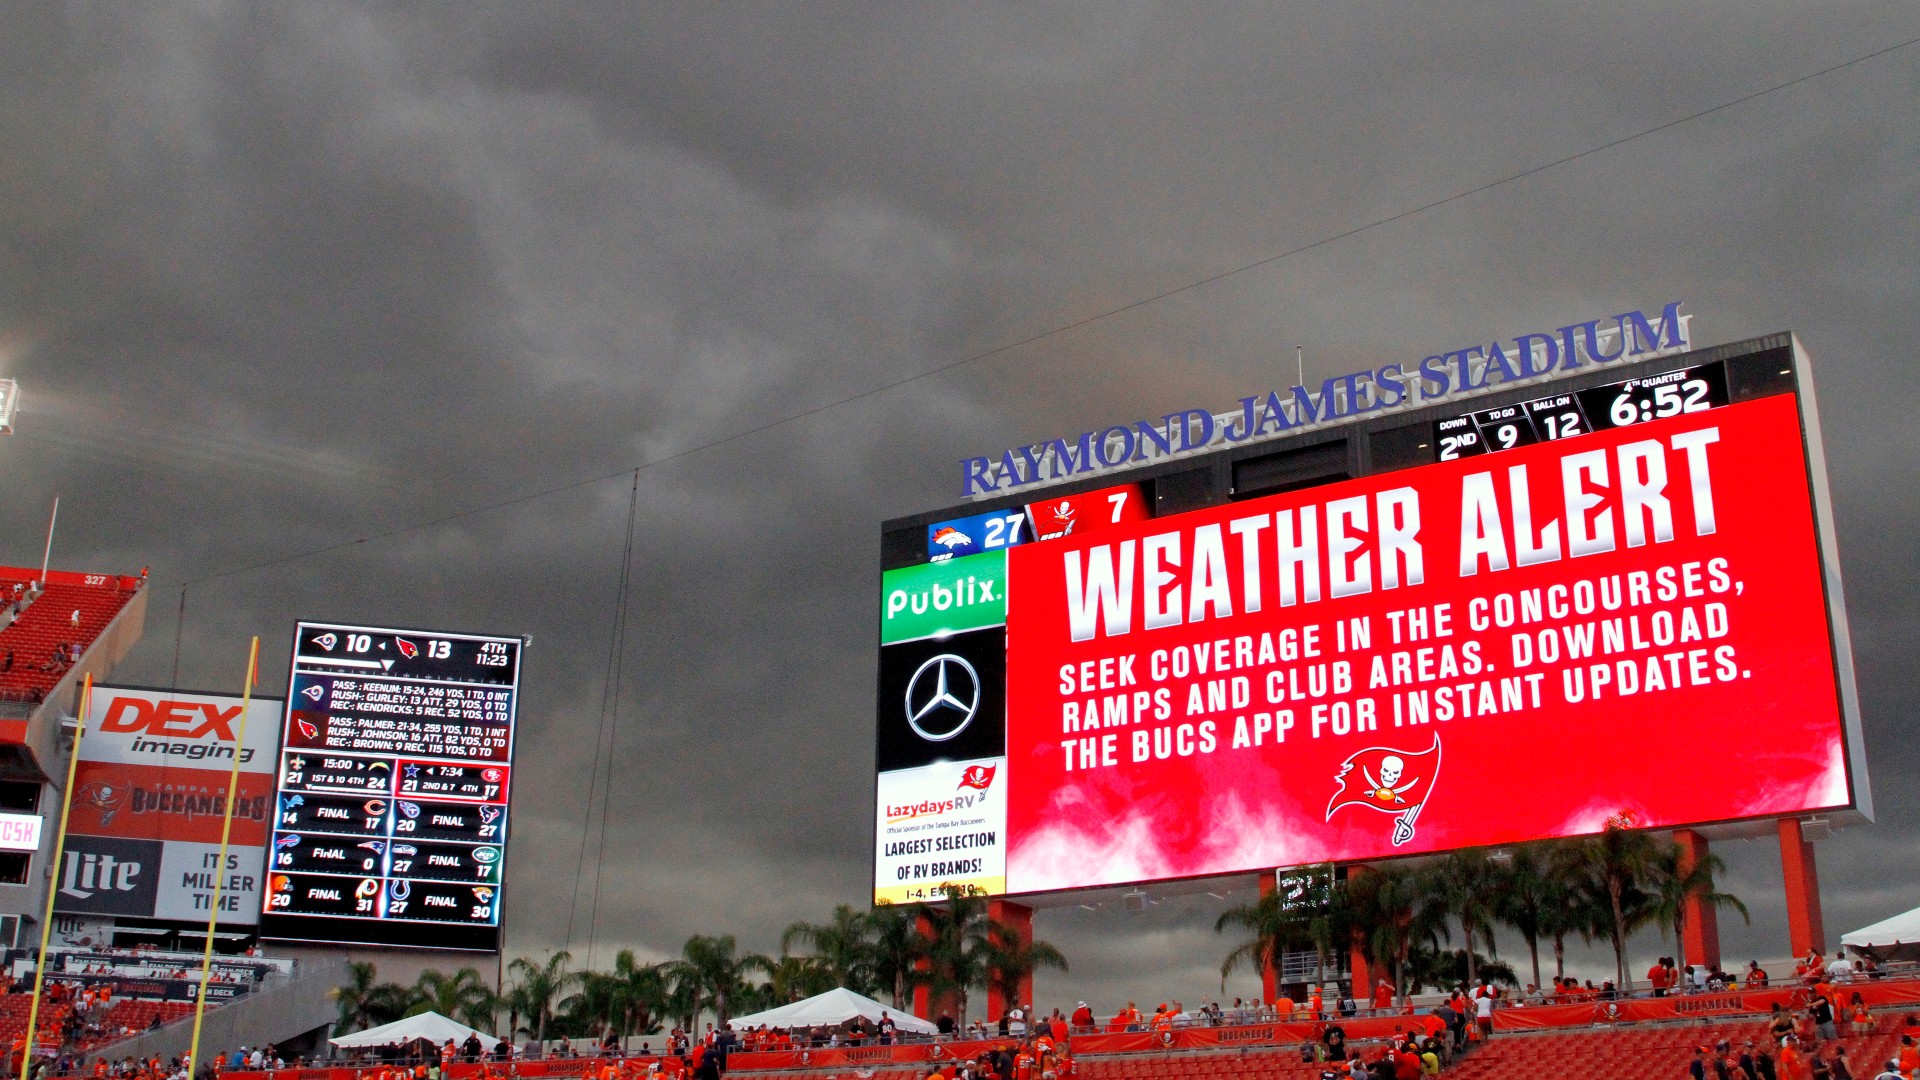 Super Bowl 2021 weather updates: Will rain in forecast impact Chiefs vs. Buccaneers in Tampa?